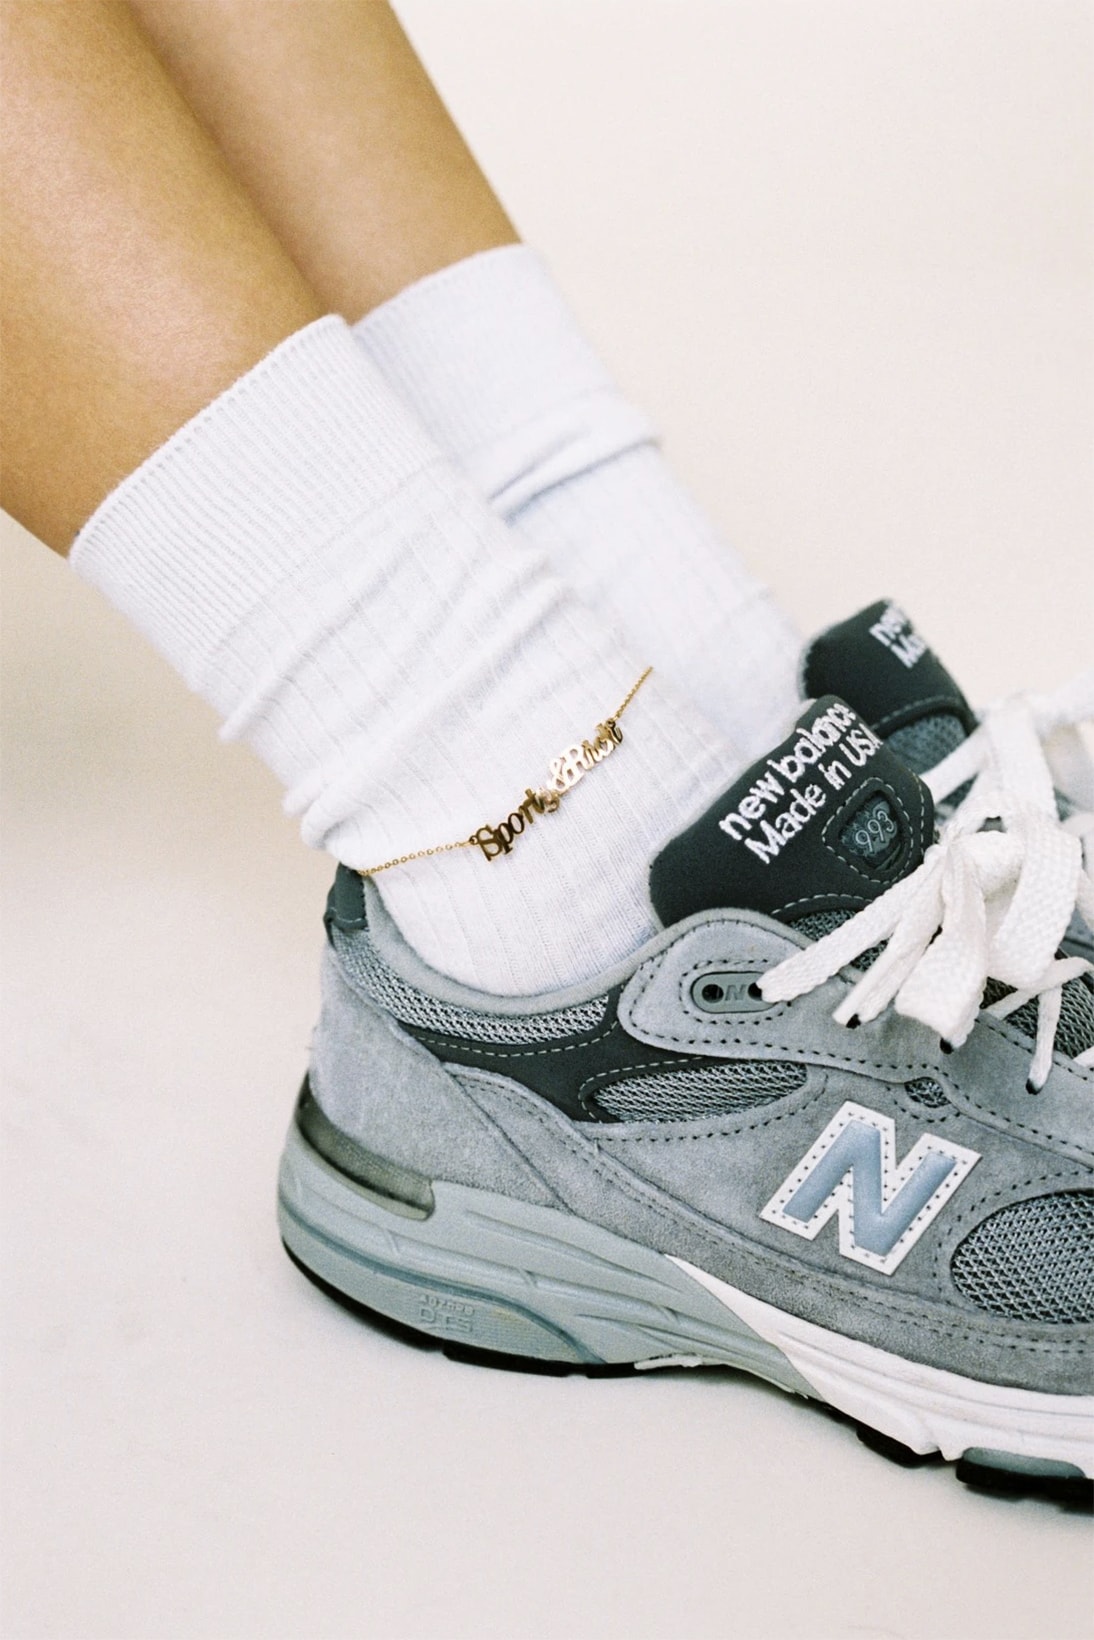 sporty and rich emily oberg gold plated anklet jewelry accessories 